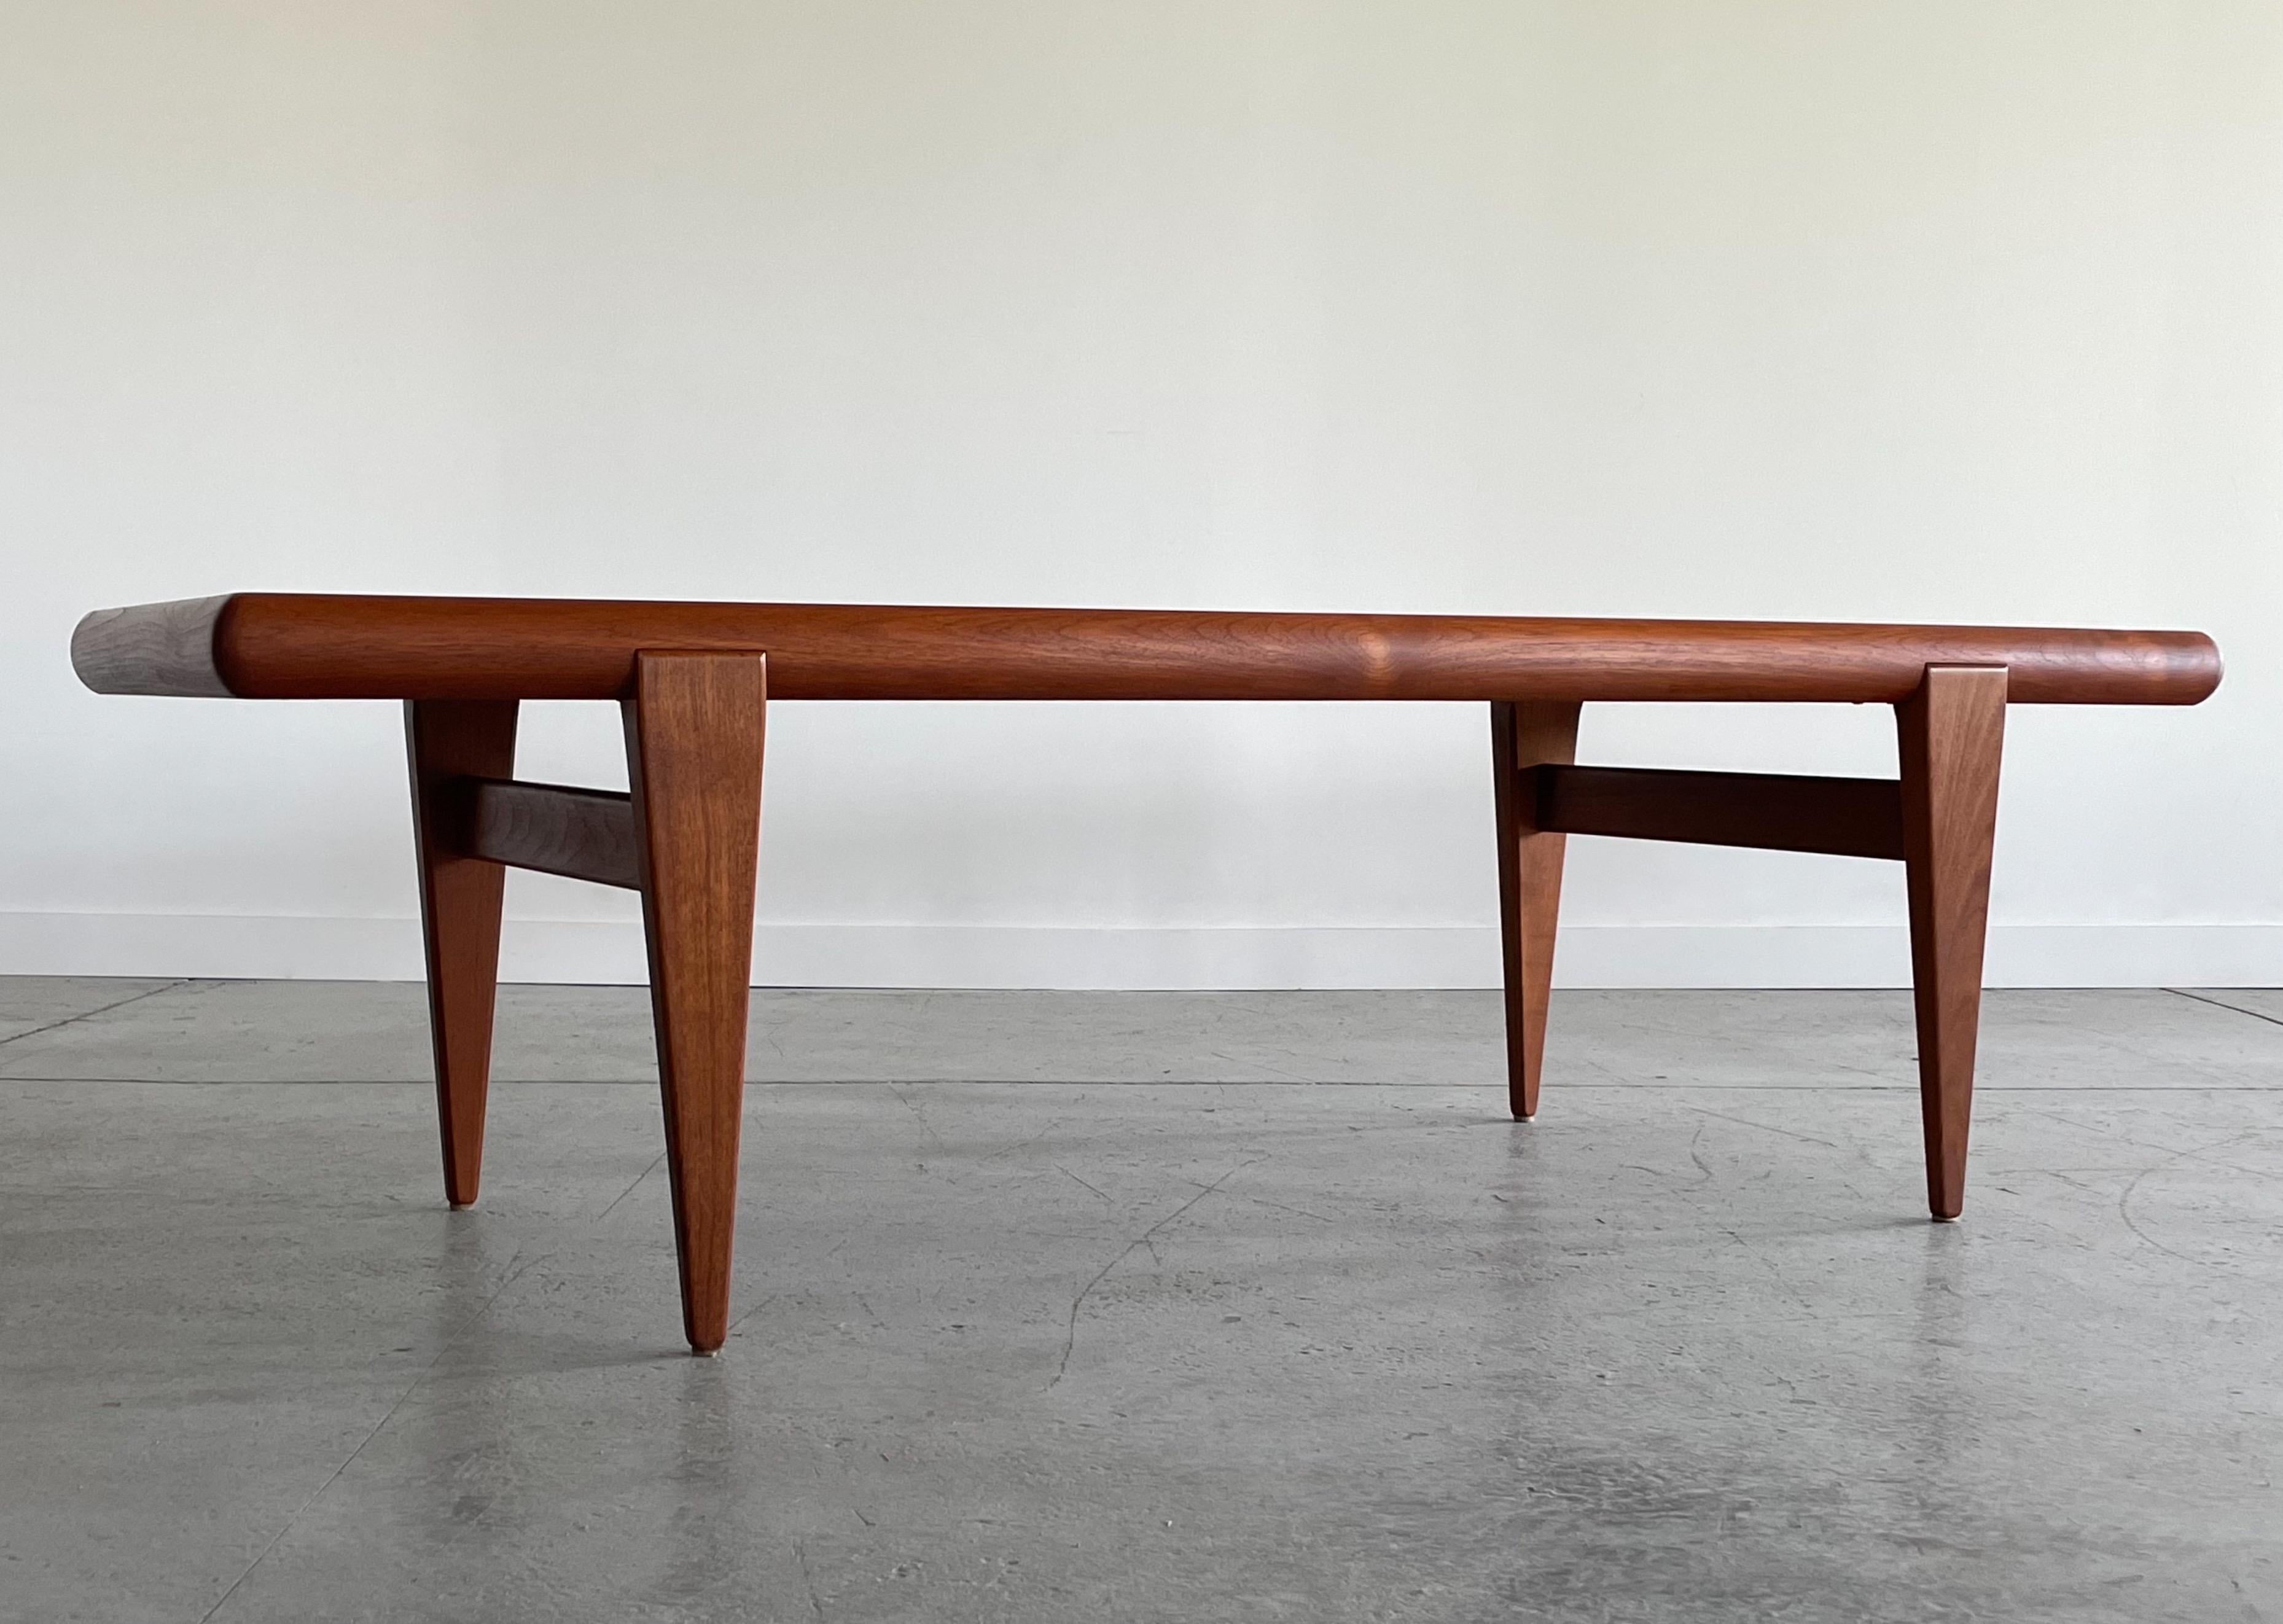 Sculptural teak coffee table by Kristiansen & Thomassen, Denmark. This piece has a substantial profile and features a thick top with contoured edging, and a nicely sculpted leg detail. This unique design is very sturdy and in excellent restored